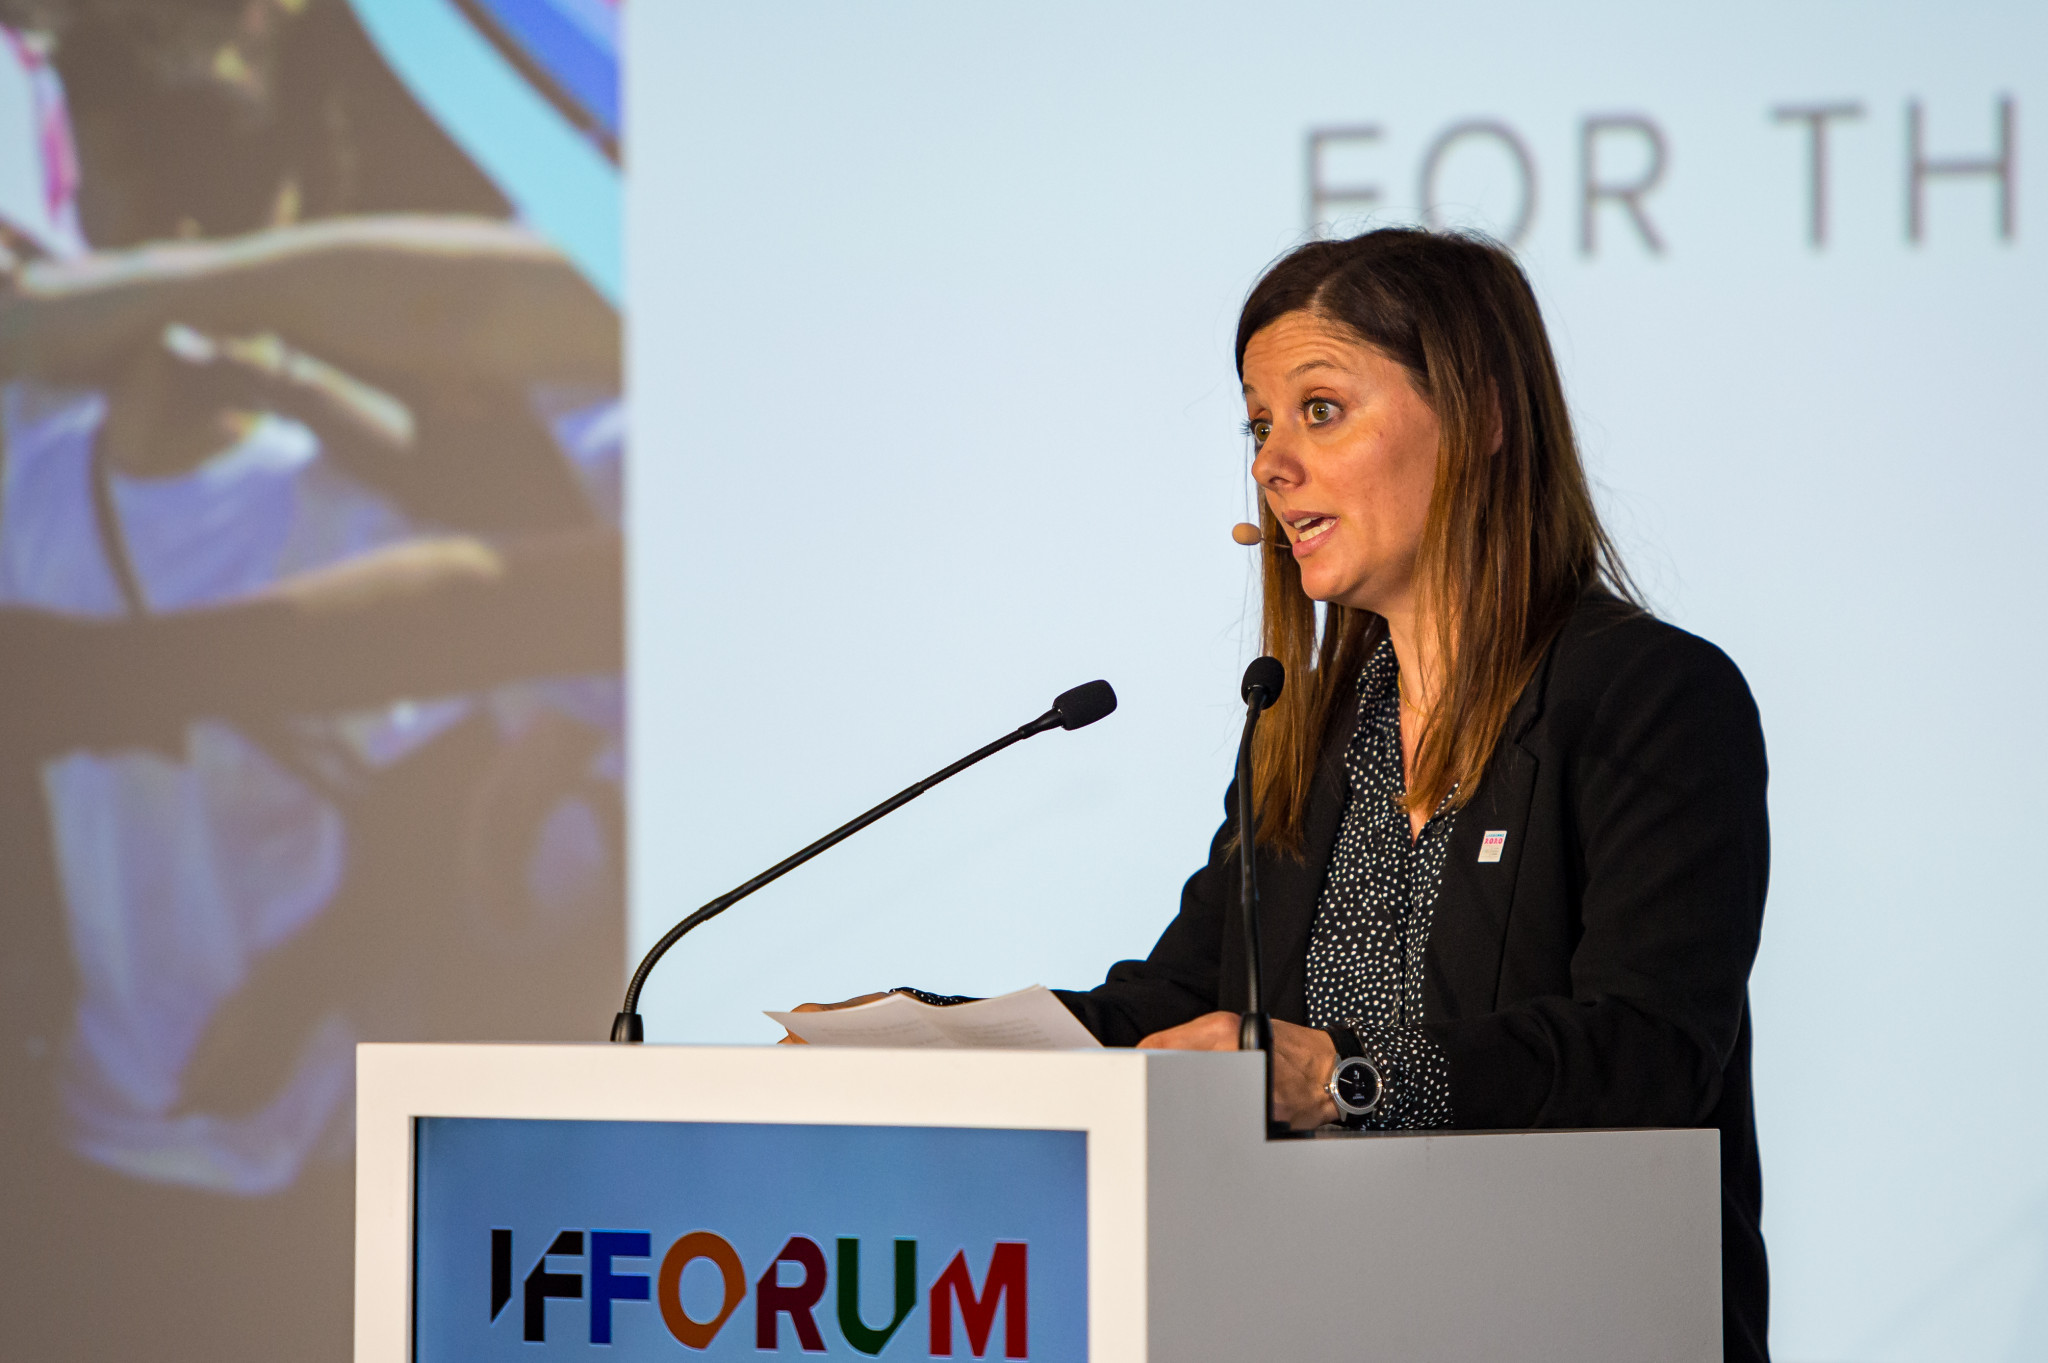 Lausanne 2020 can play role in empowering young athletes, claims Faivre